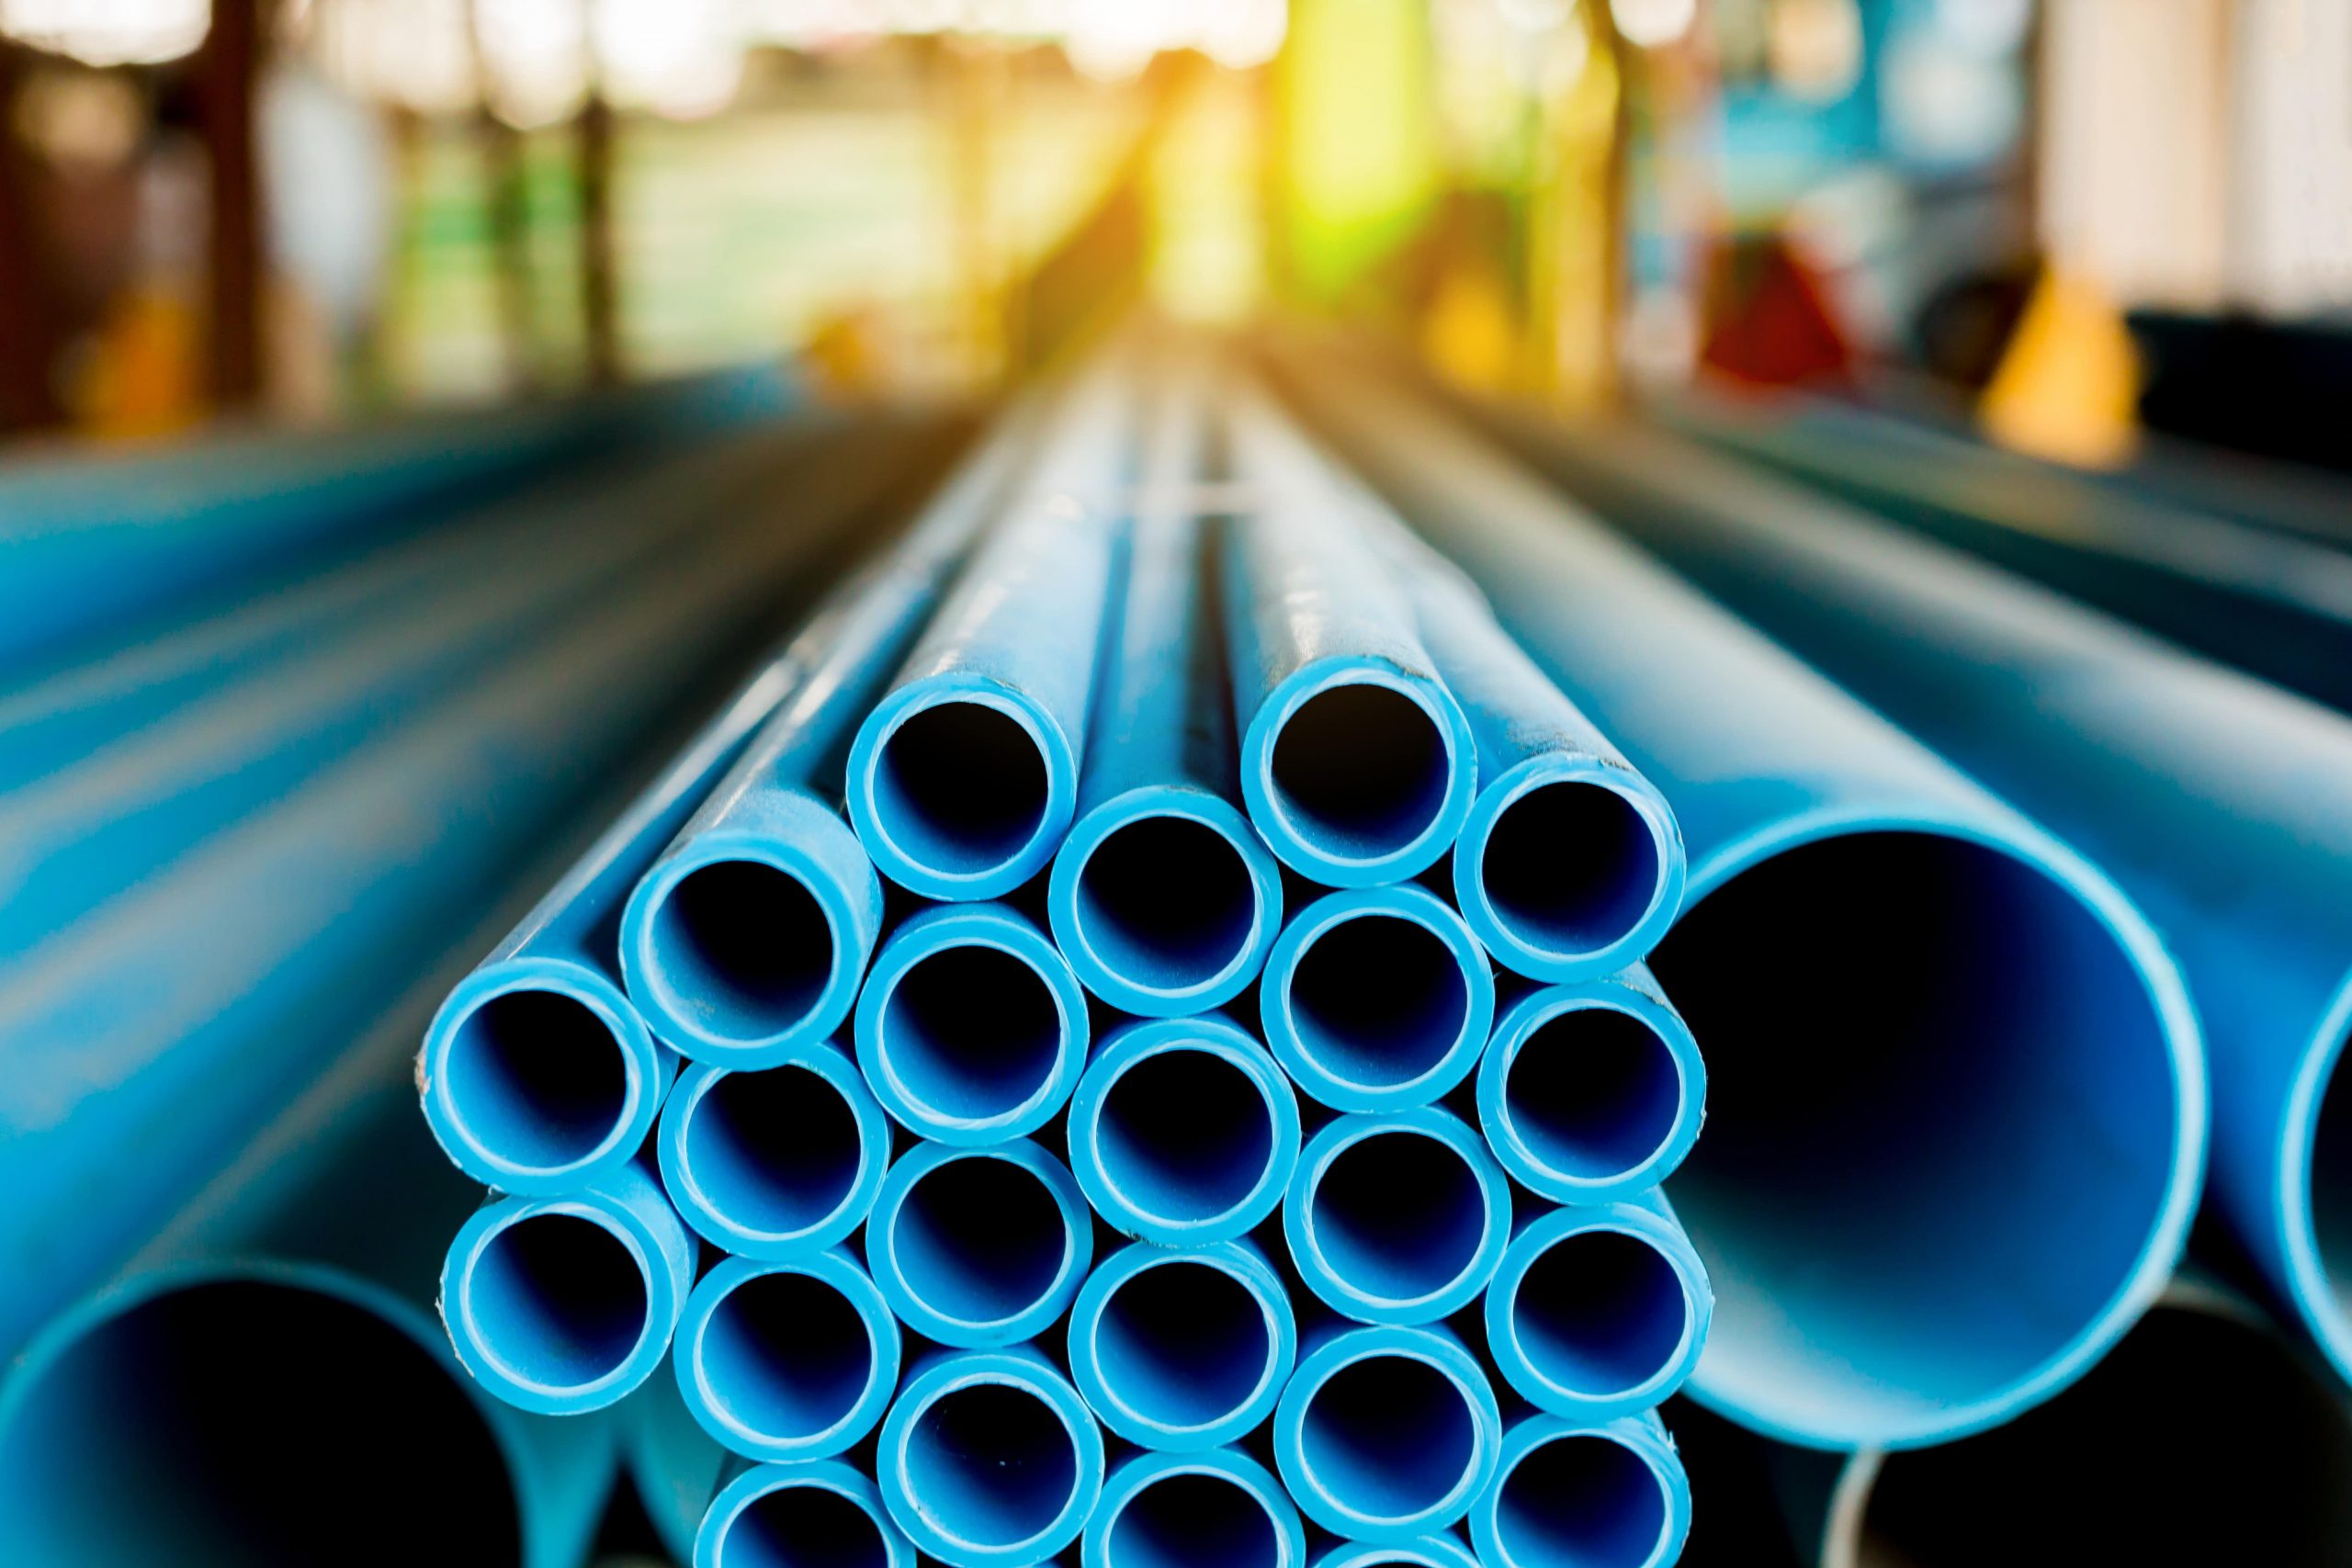 Future Prospects of the PVC Pipes Market: Growing Infrastructure Development and Increasing Demand for Irrigation Systems